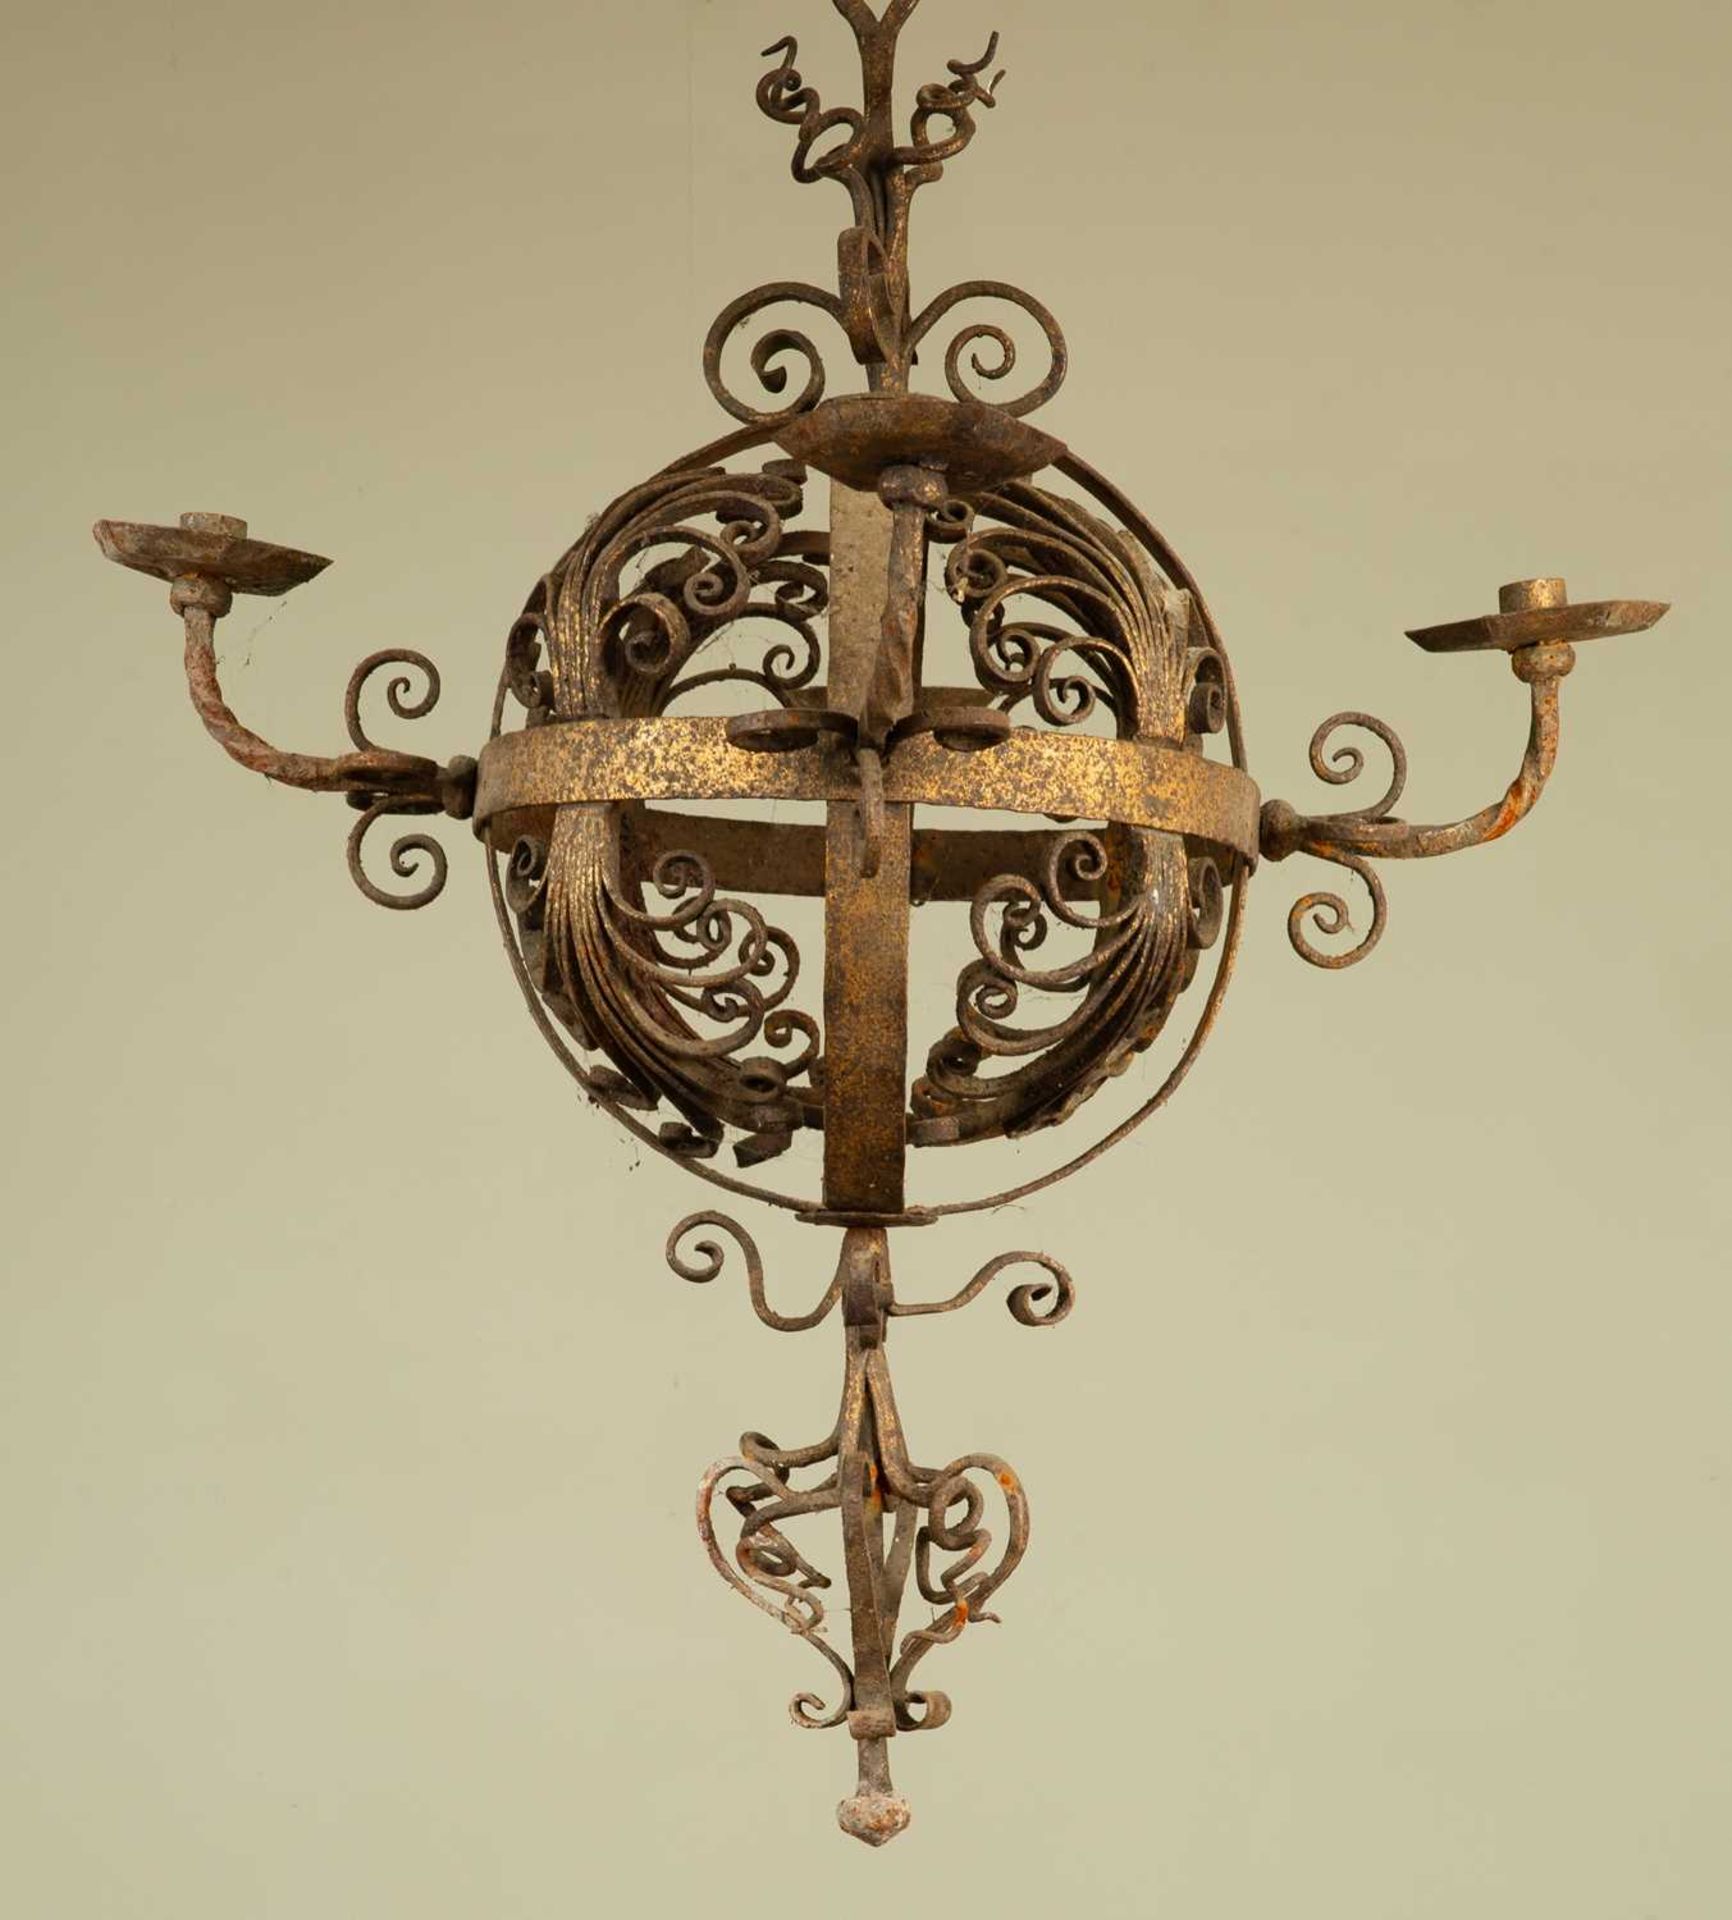 An early 20th century wrought iron hanging chandelier, the central globe with four branches and